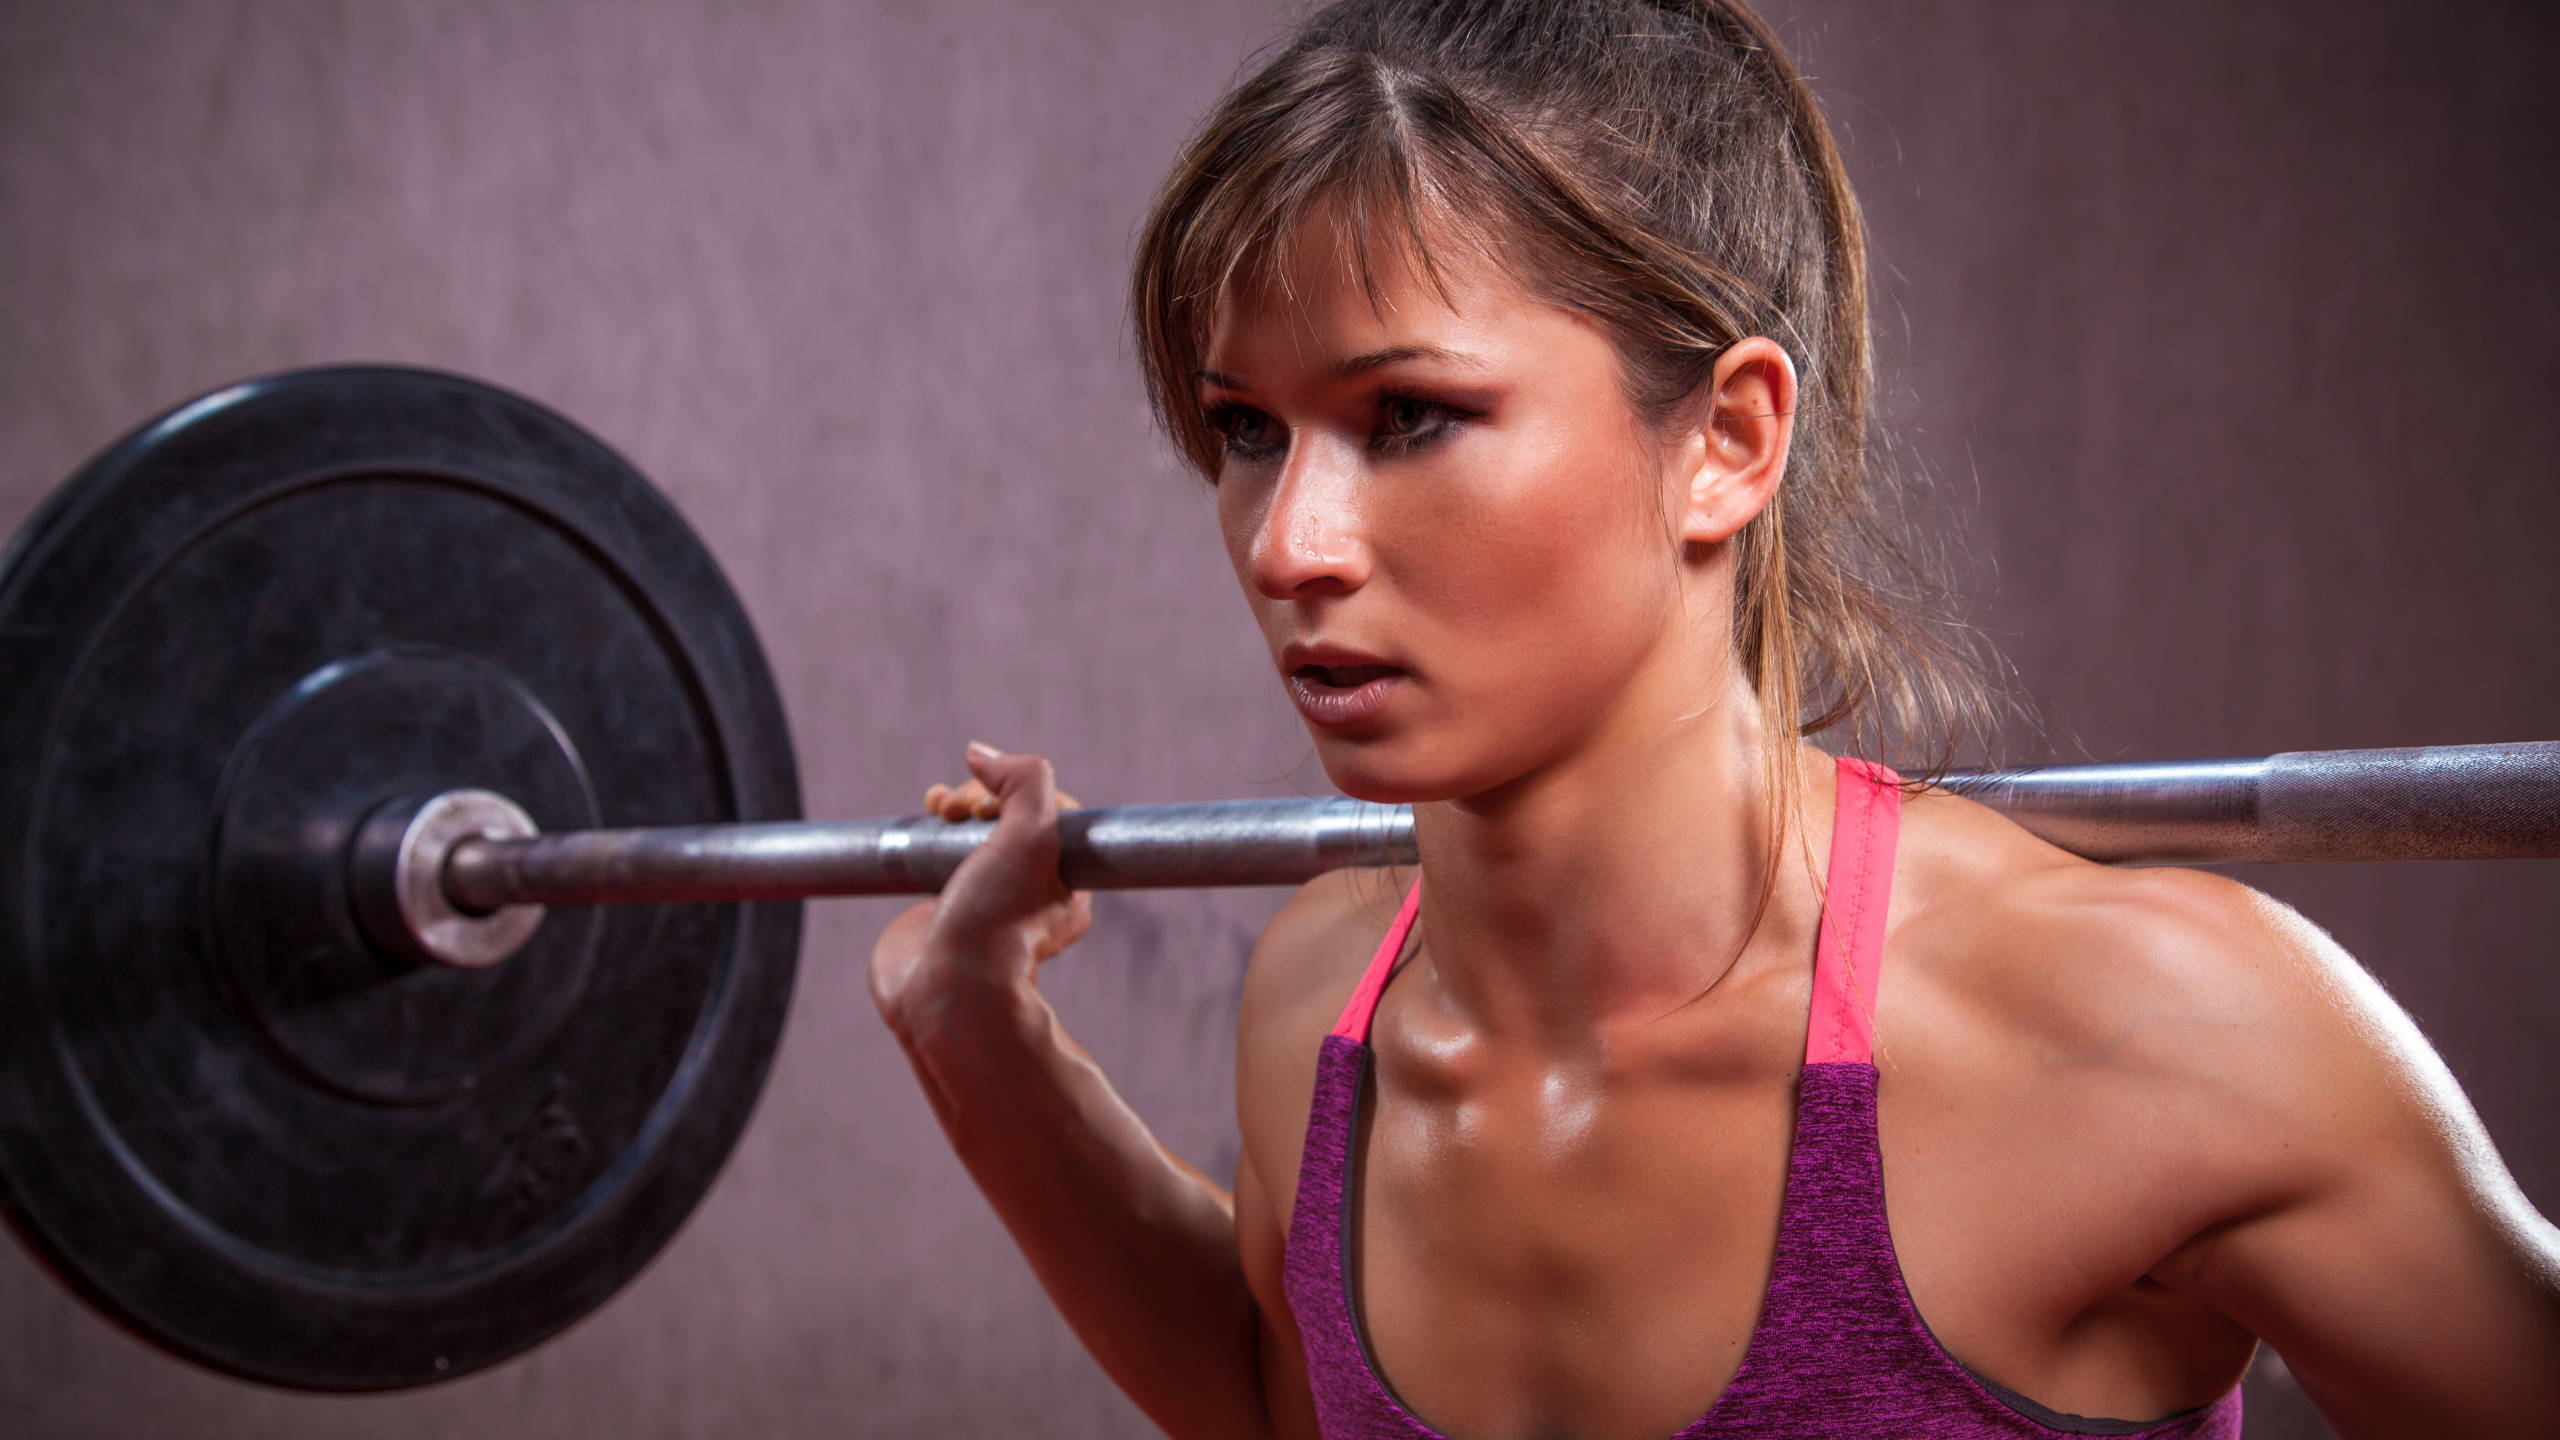 Woman in Pink Tank Top Holding Barbell. Wallpaper in 2560x1440 Resolution